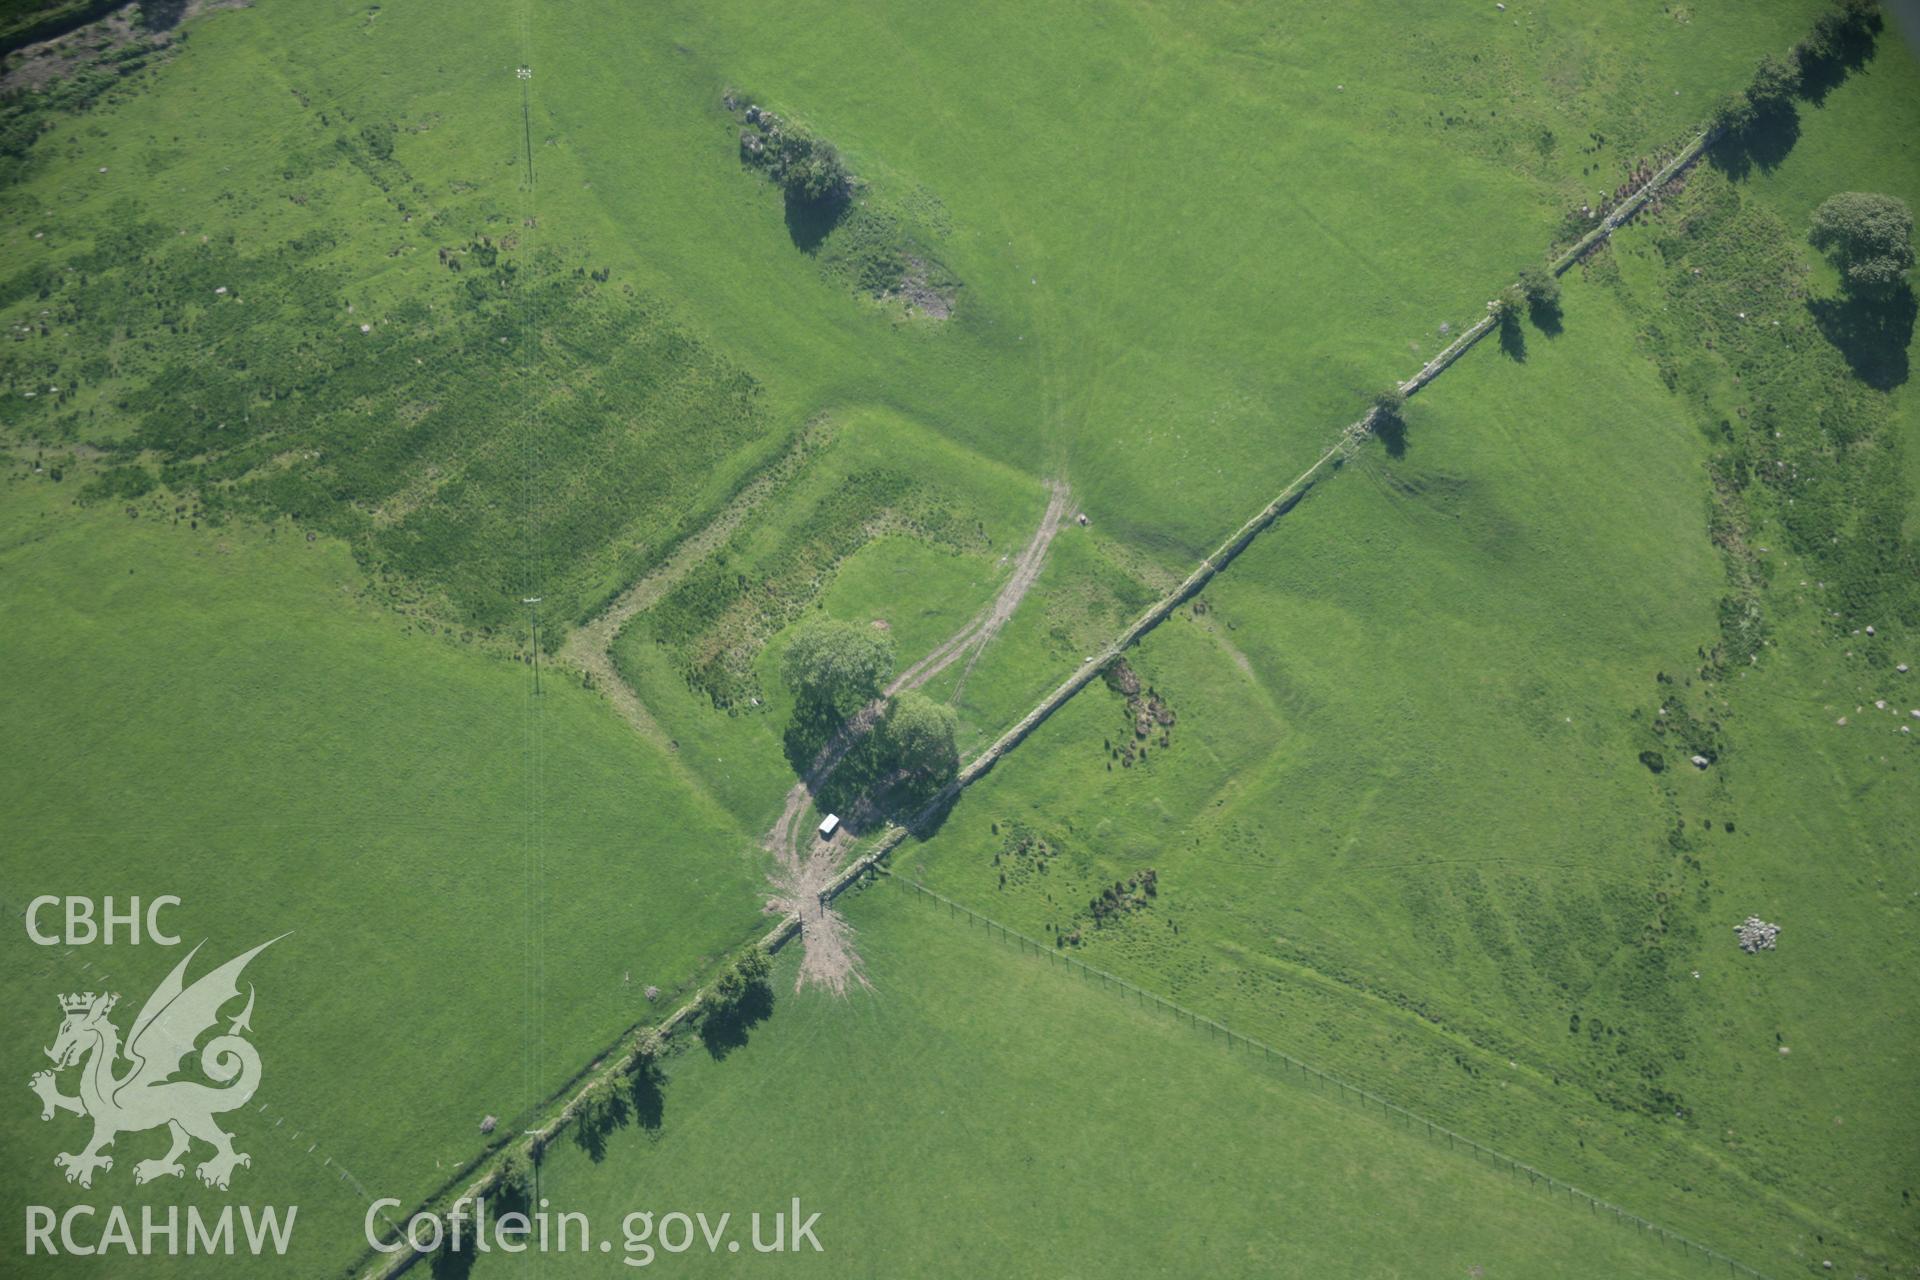 RCAHMW digital colour oblique photograph of a rectangular earthwork near Coed y Mawr viewed from the east. Taken on 08/06/2005 by T.G. Driver.